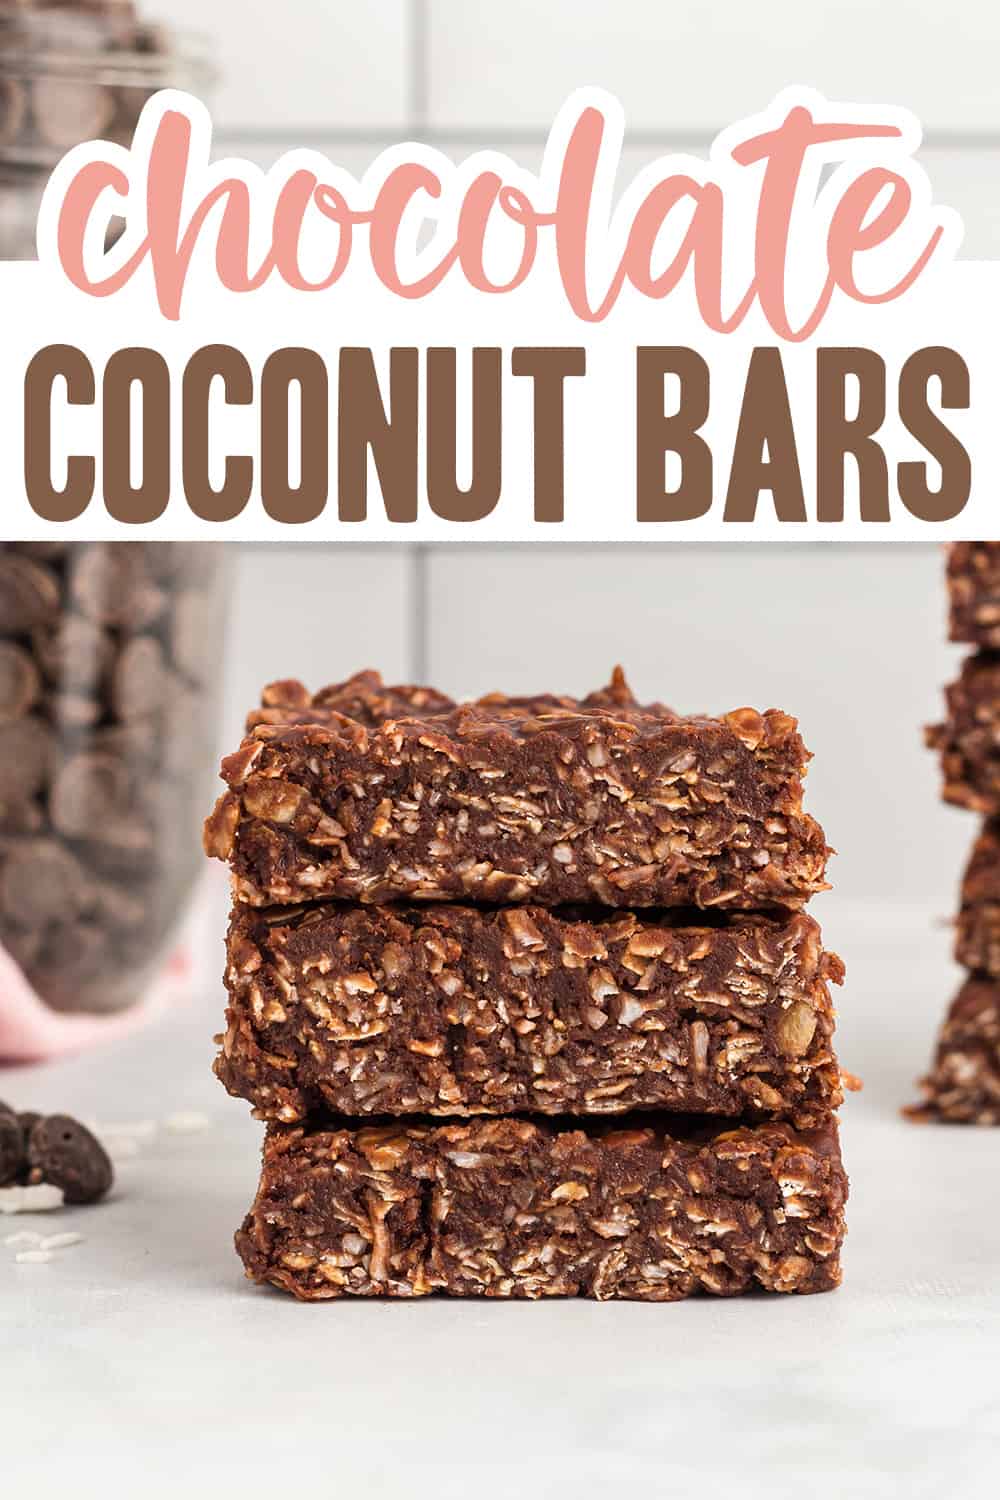 Chocolate Coconut Bars stacked up on counter.